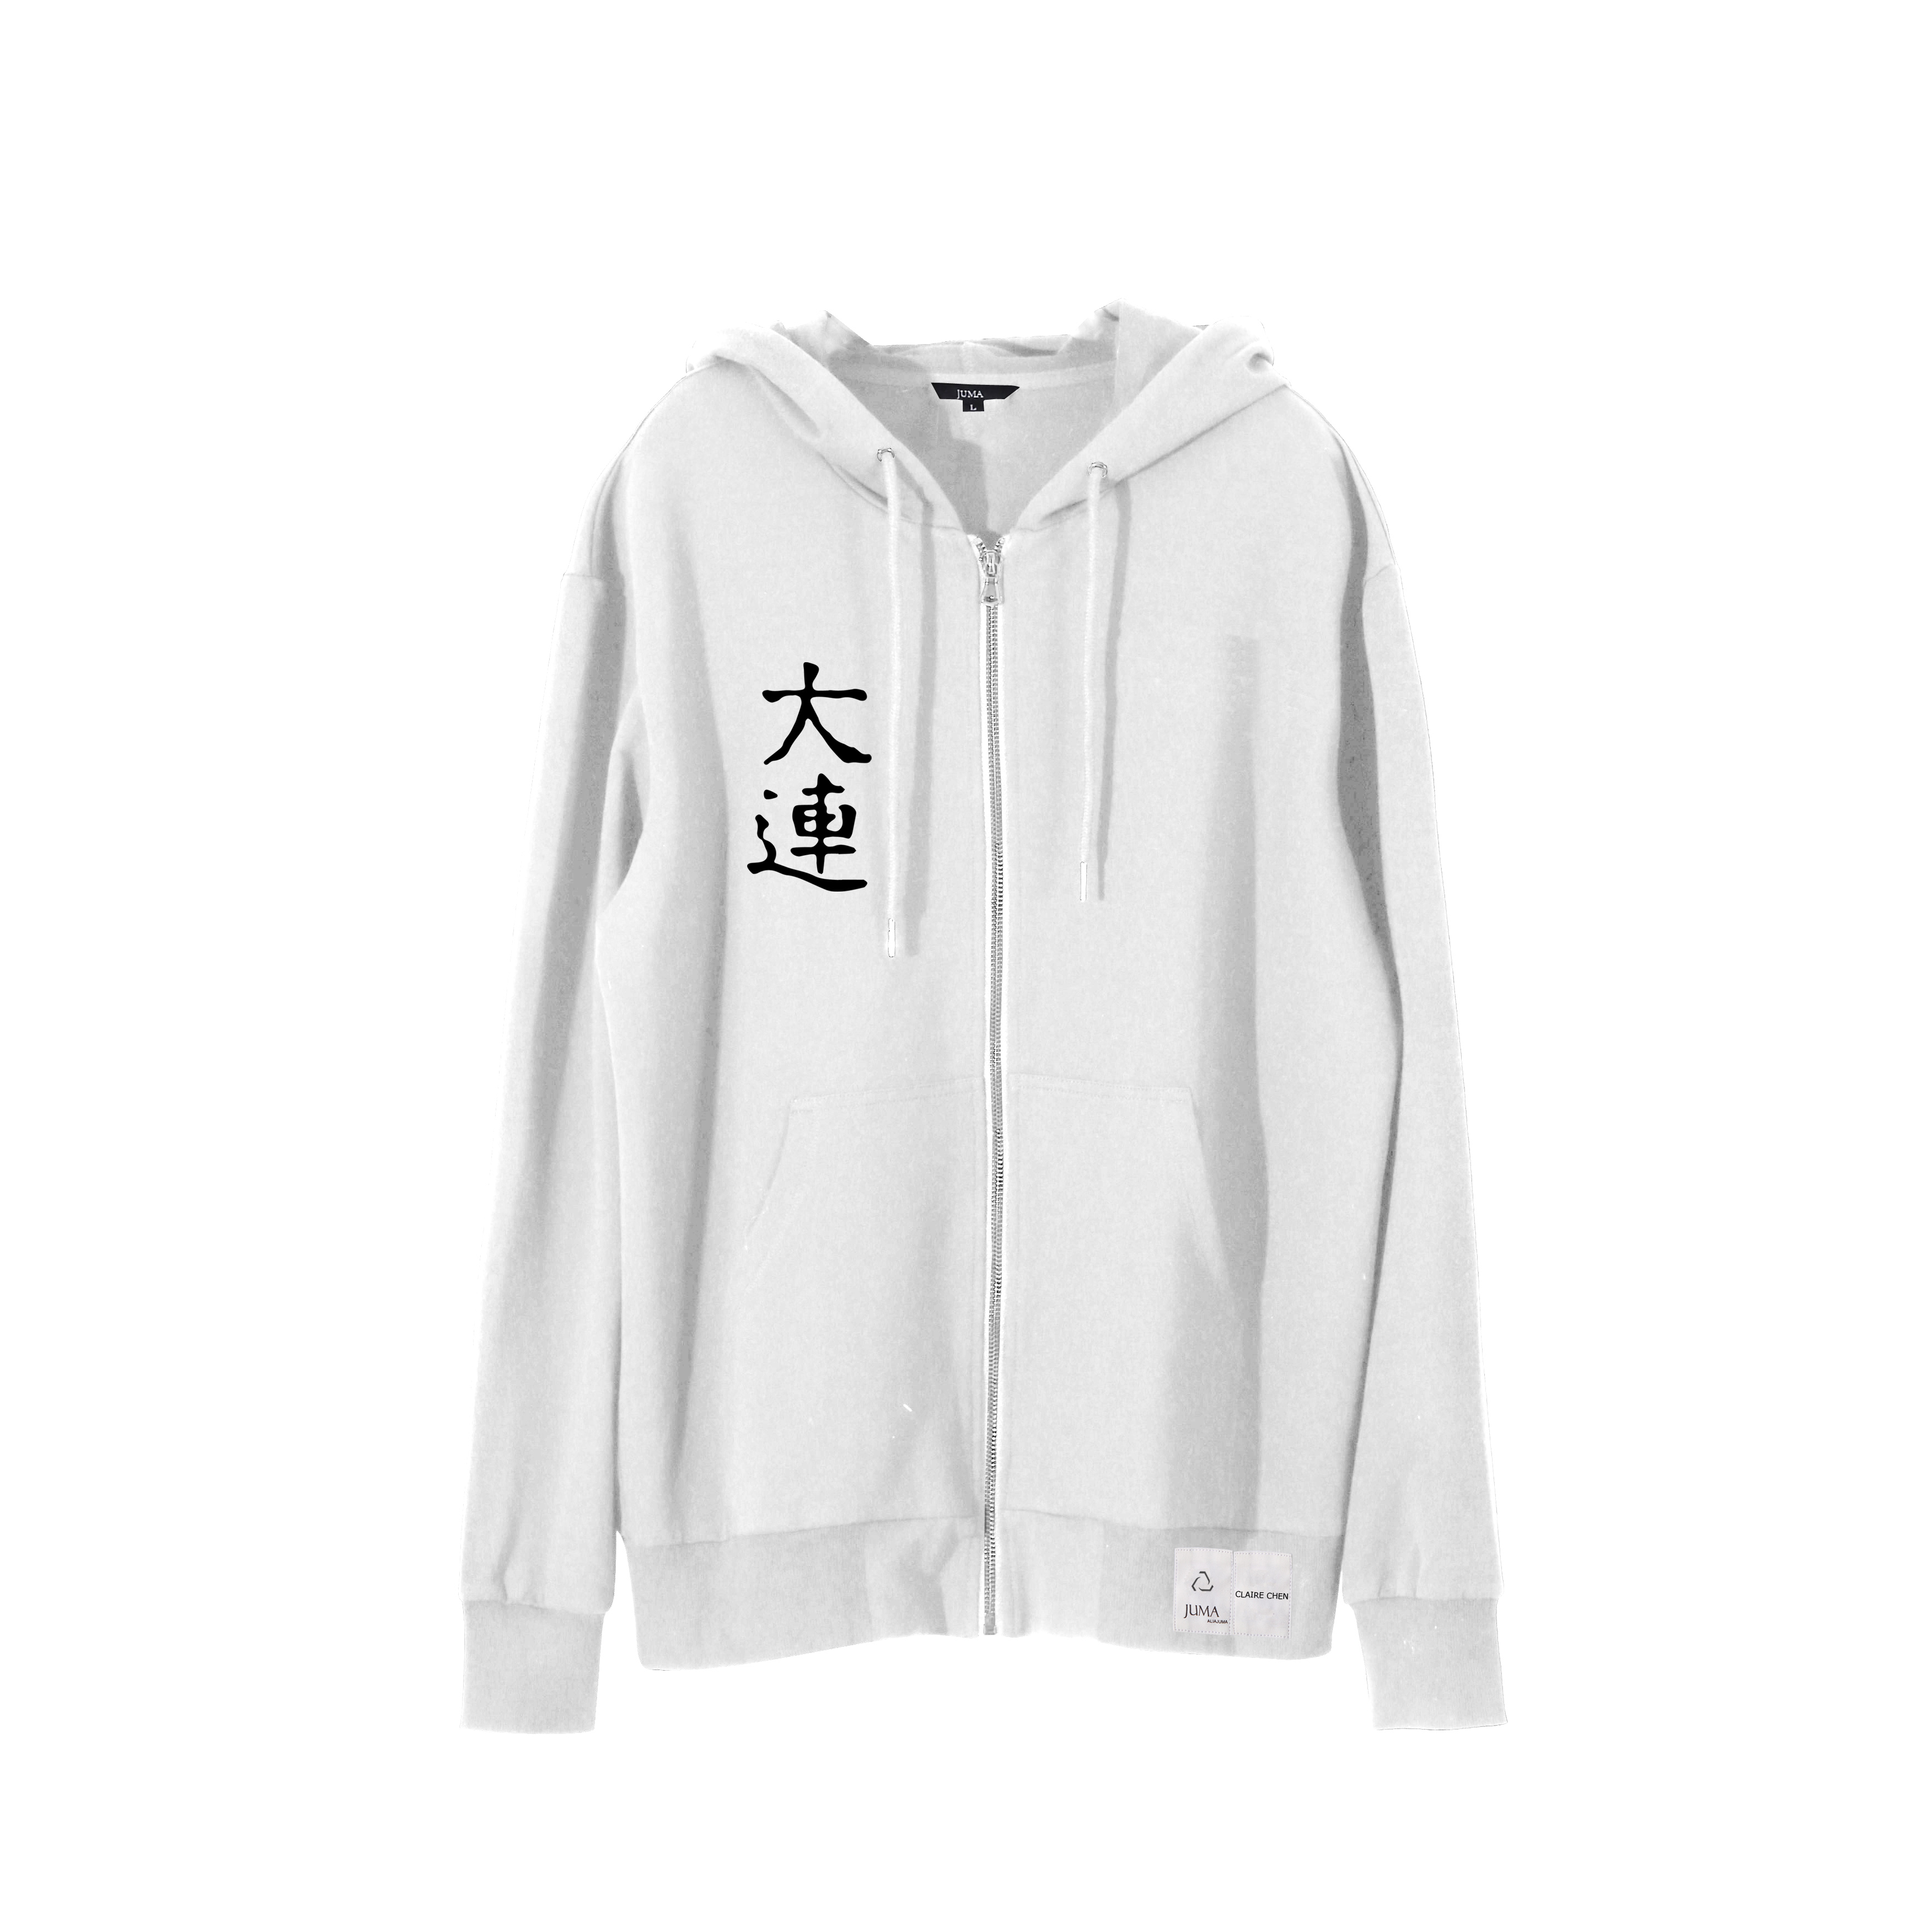 Claire Chen 连帽衫-8个再生水瓶-白色｜Claire Chen Hoodie - 8 Recycled Water Bottles - White